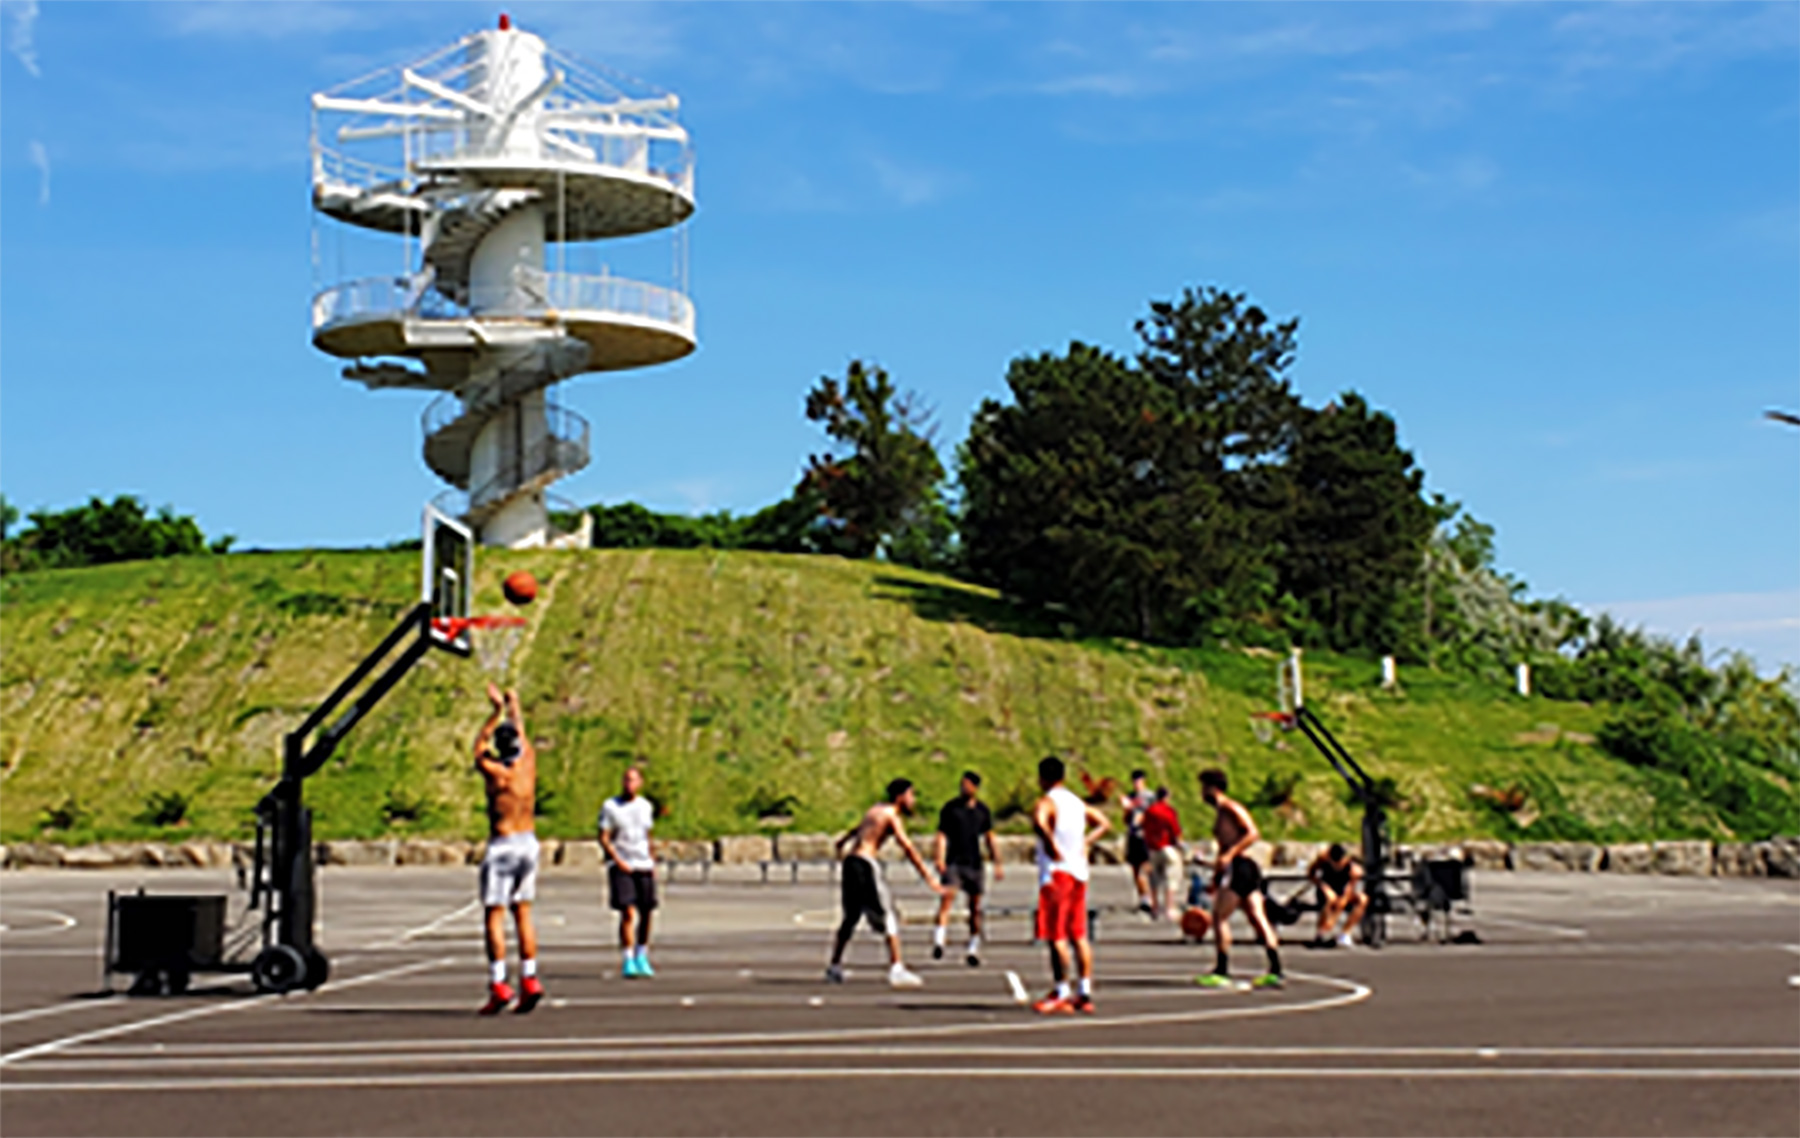 A group of people running and through a basketball on a paved surface with a basketball net. A grassy hill and a tower are in the background. 